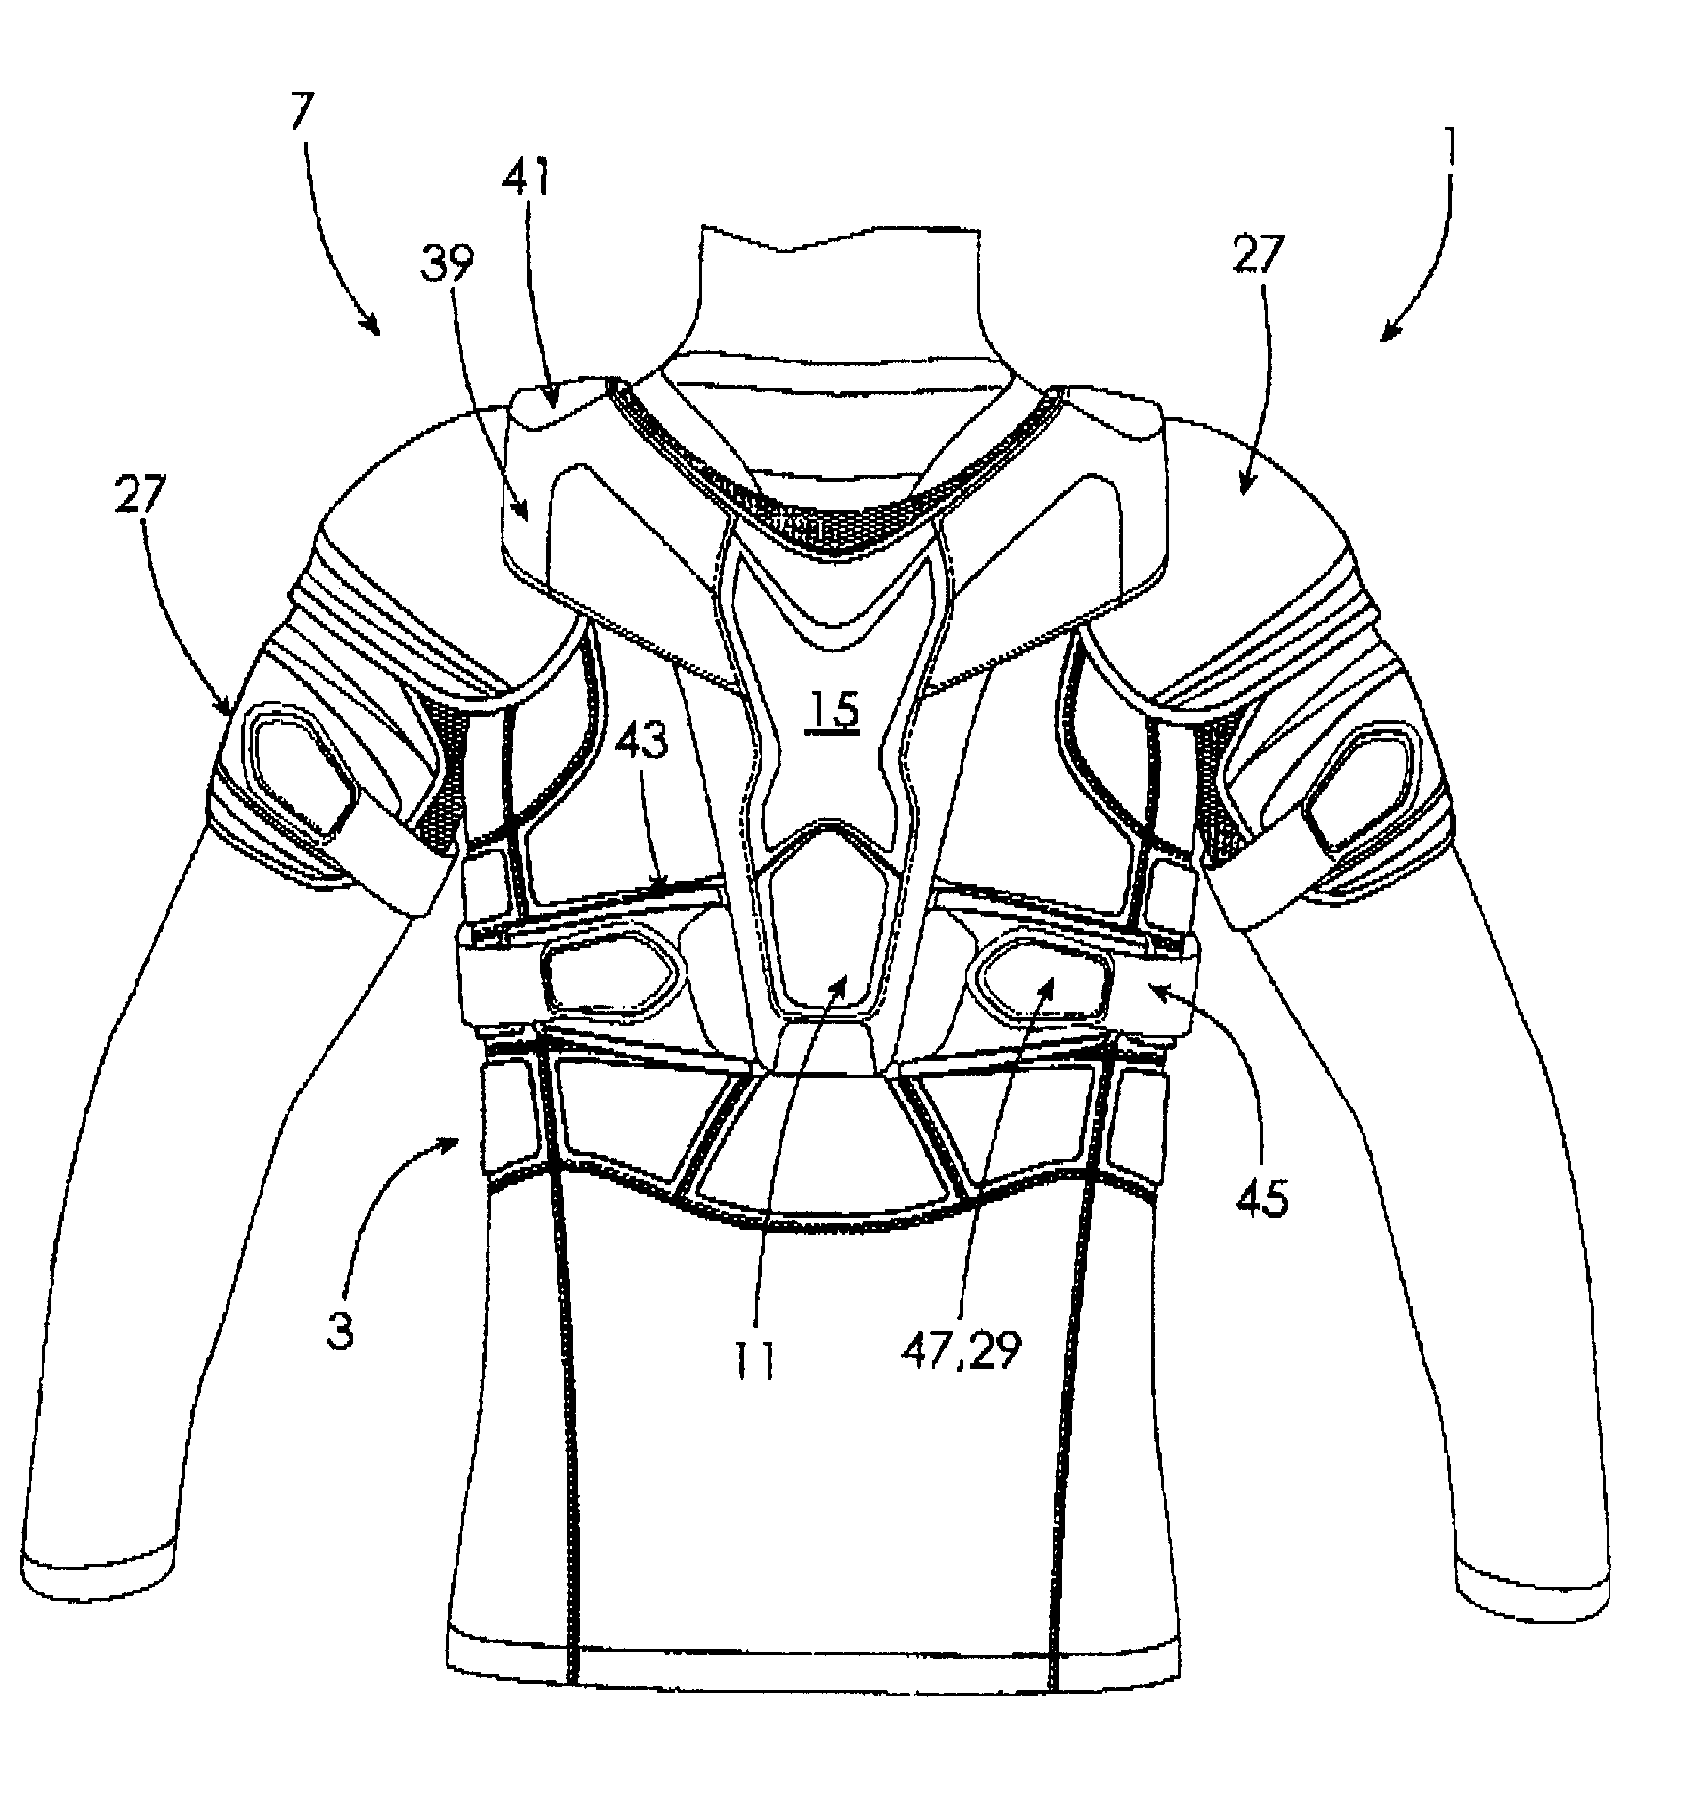 Complementary and adjustable protective system